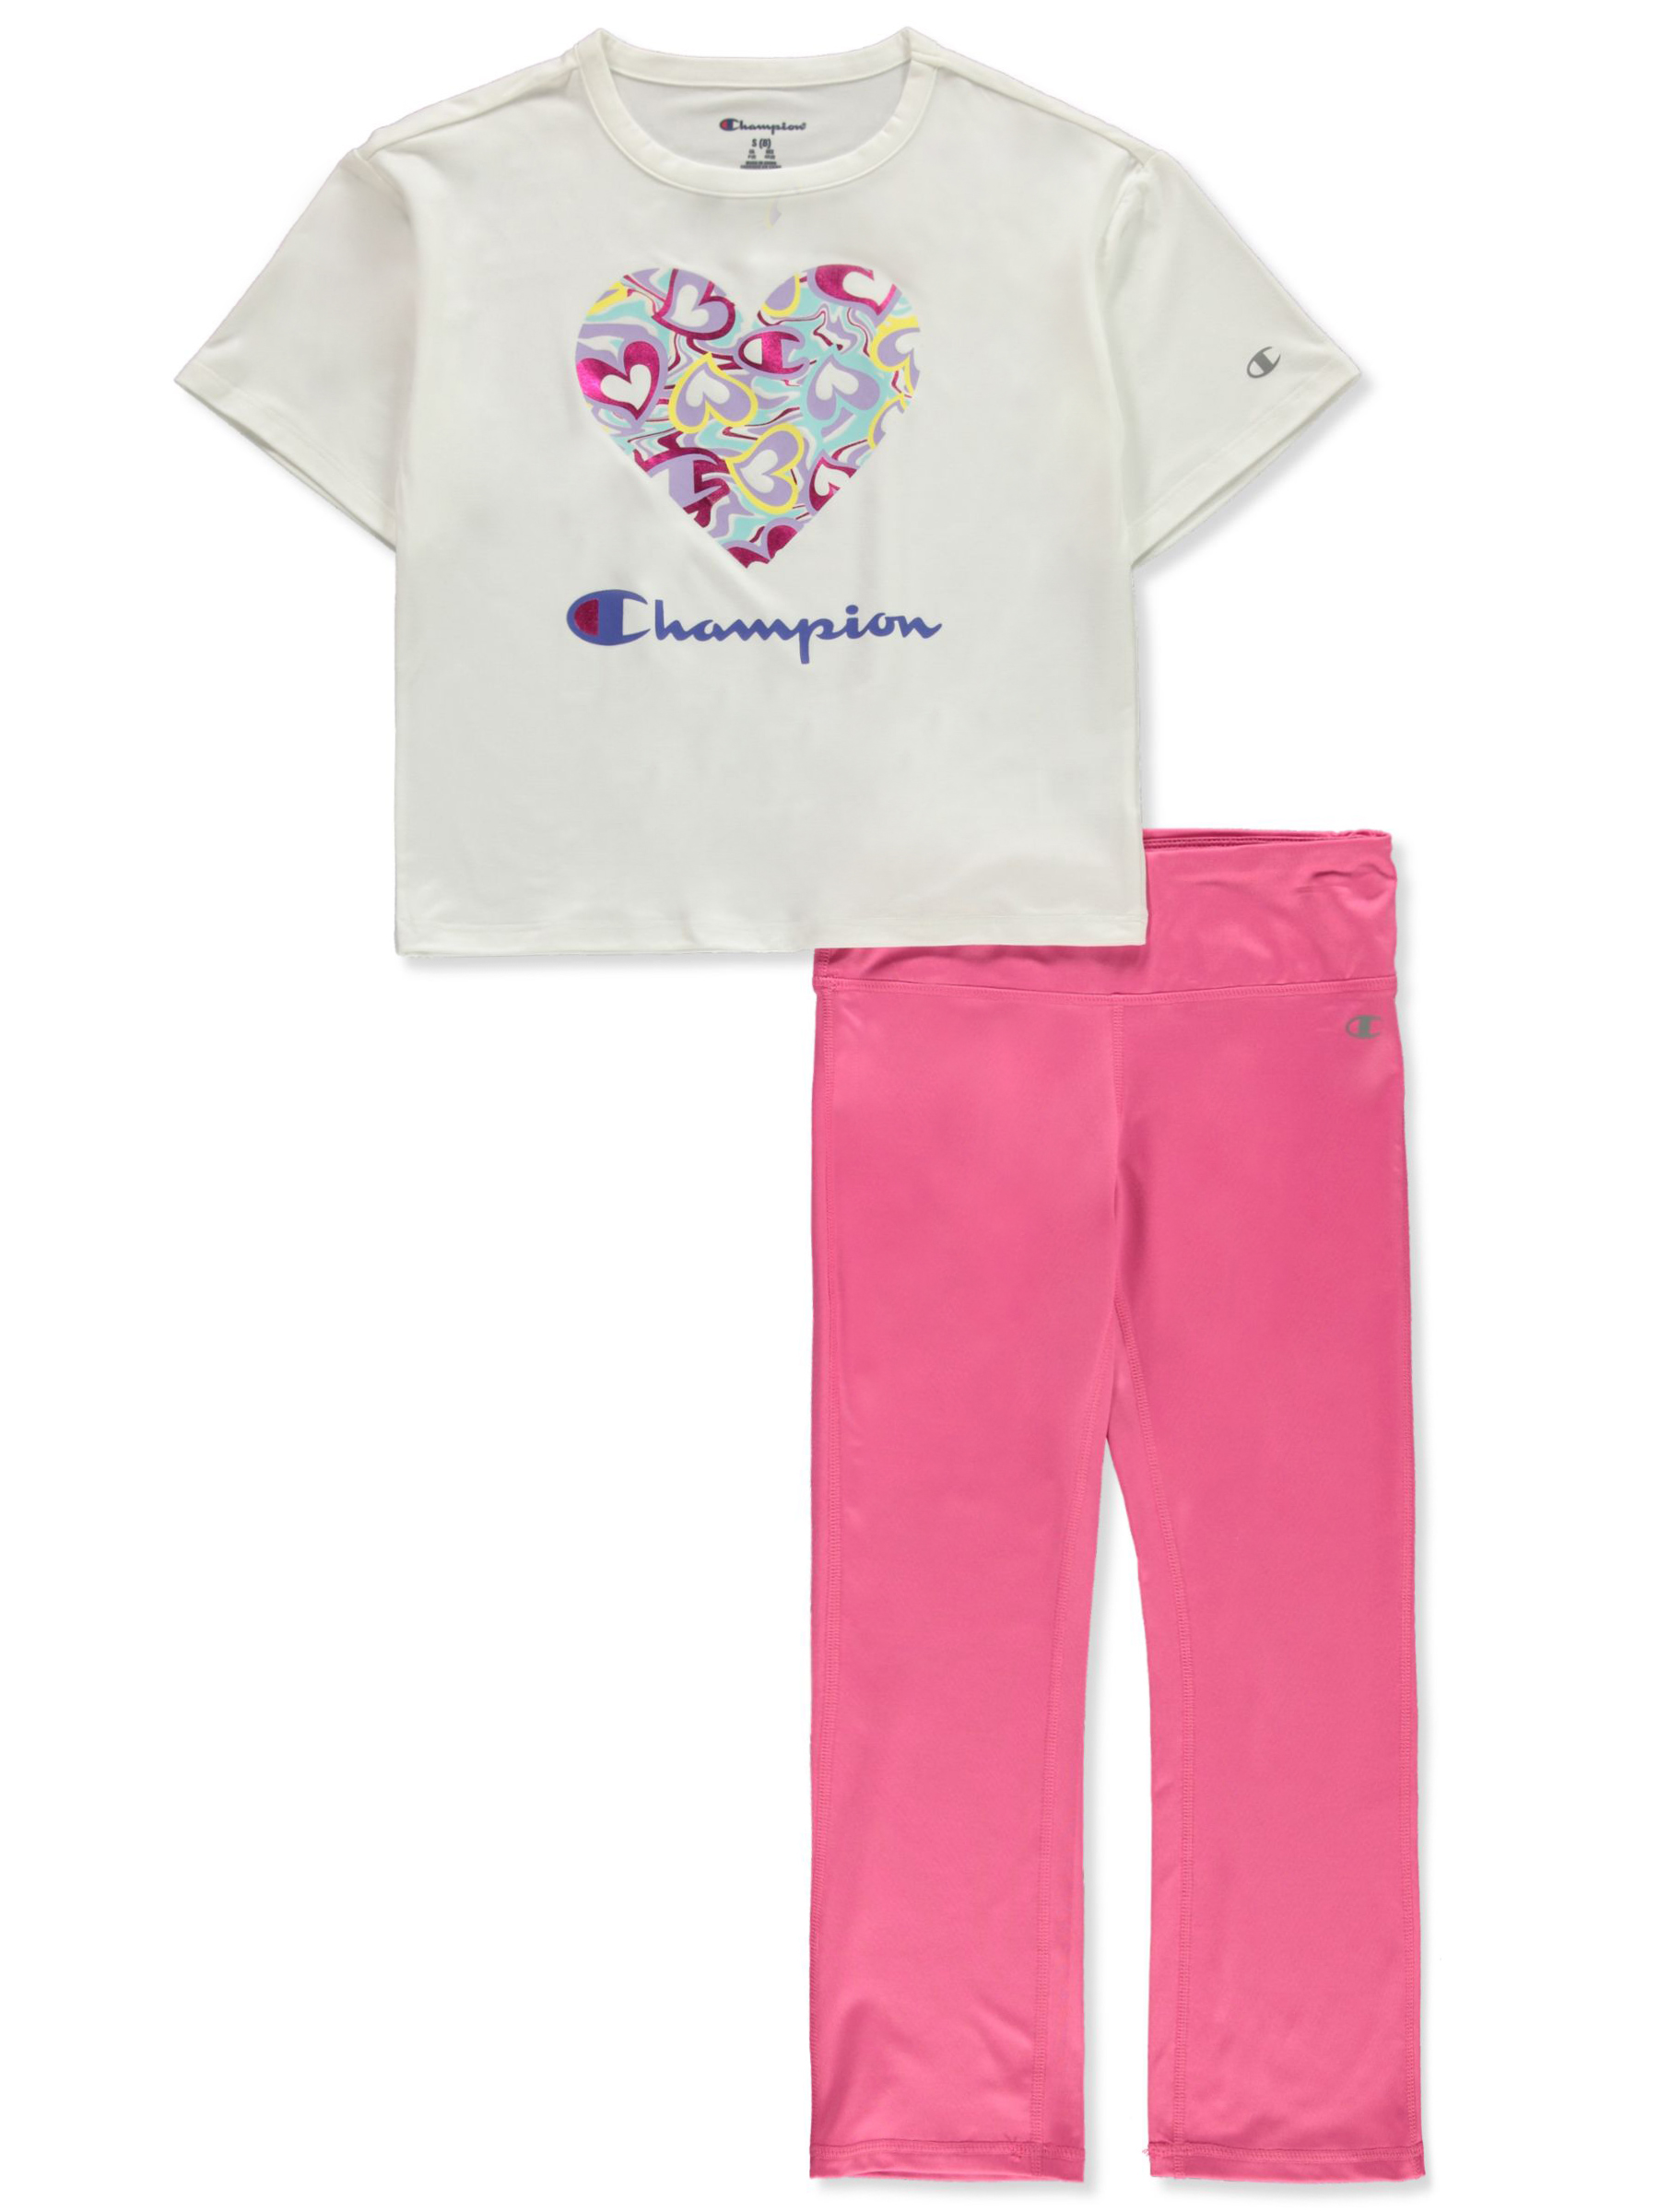 Champion Girls' 2-Piece Hearts Leggings Set Outfit